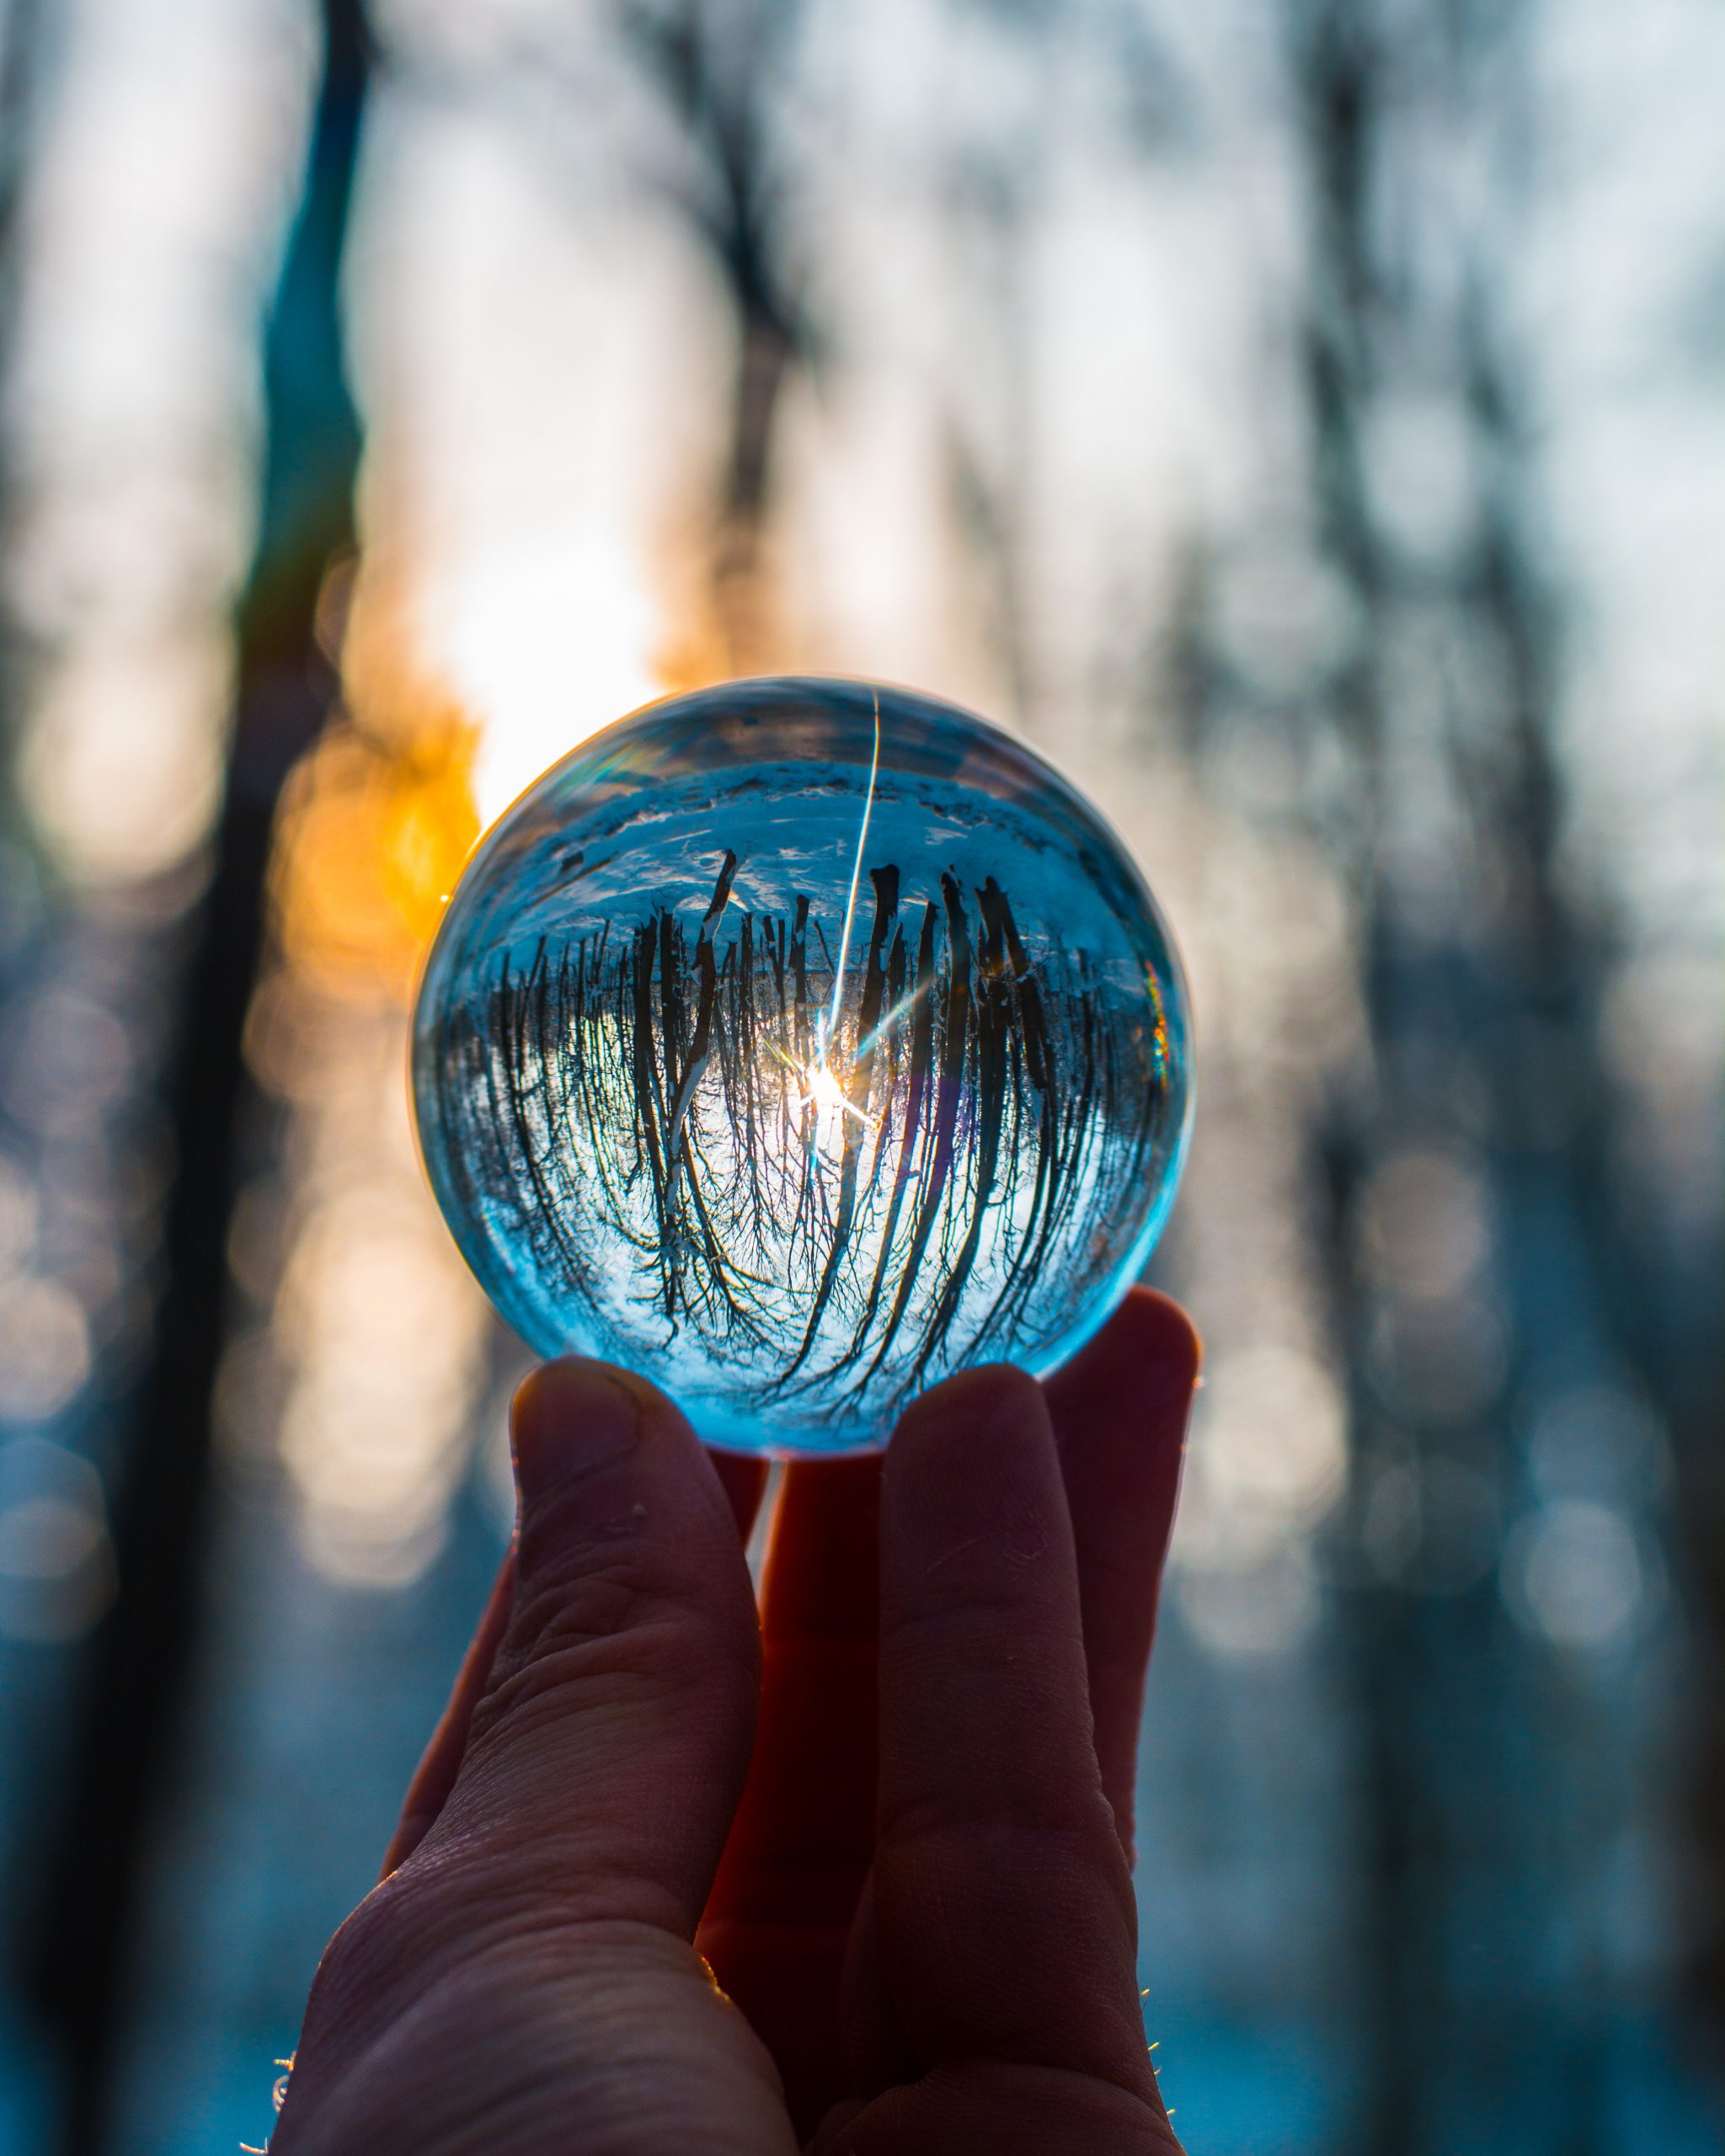 small glass ball on fingertips in woods